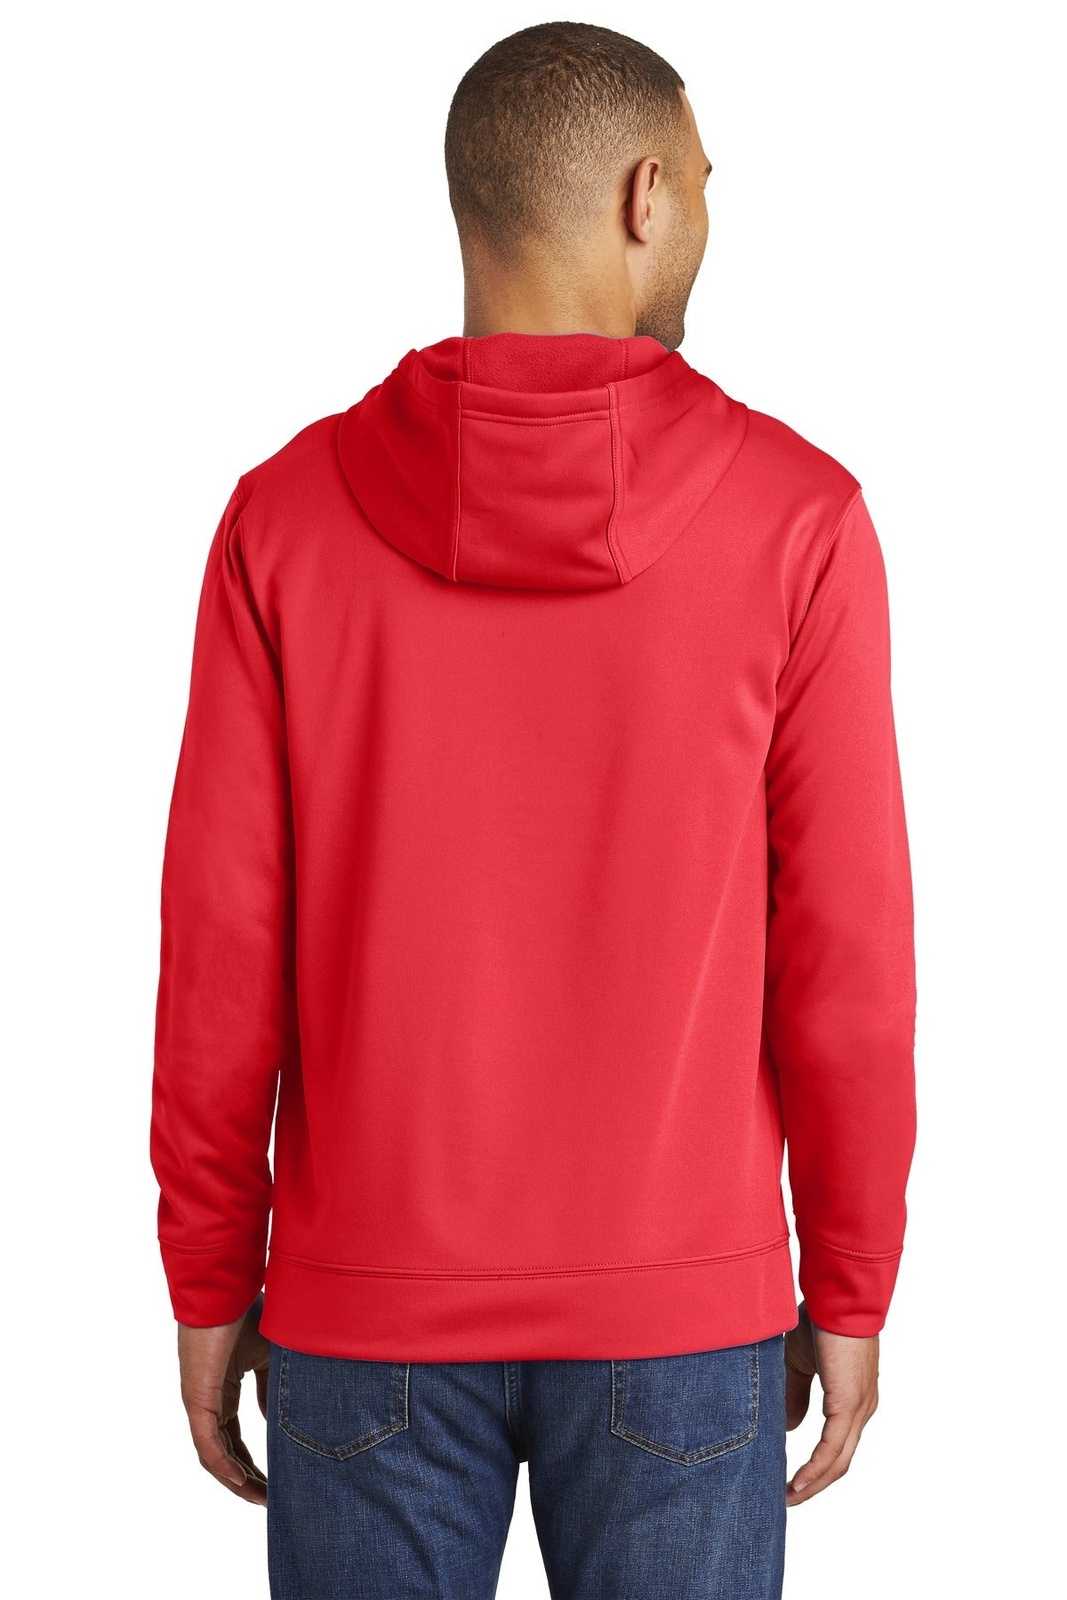 Port &amp; Company PC590H Performance Fleece Pullover Hooded Sweatshirt - Red - HIT a Double - 2